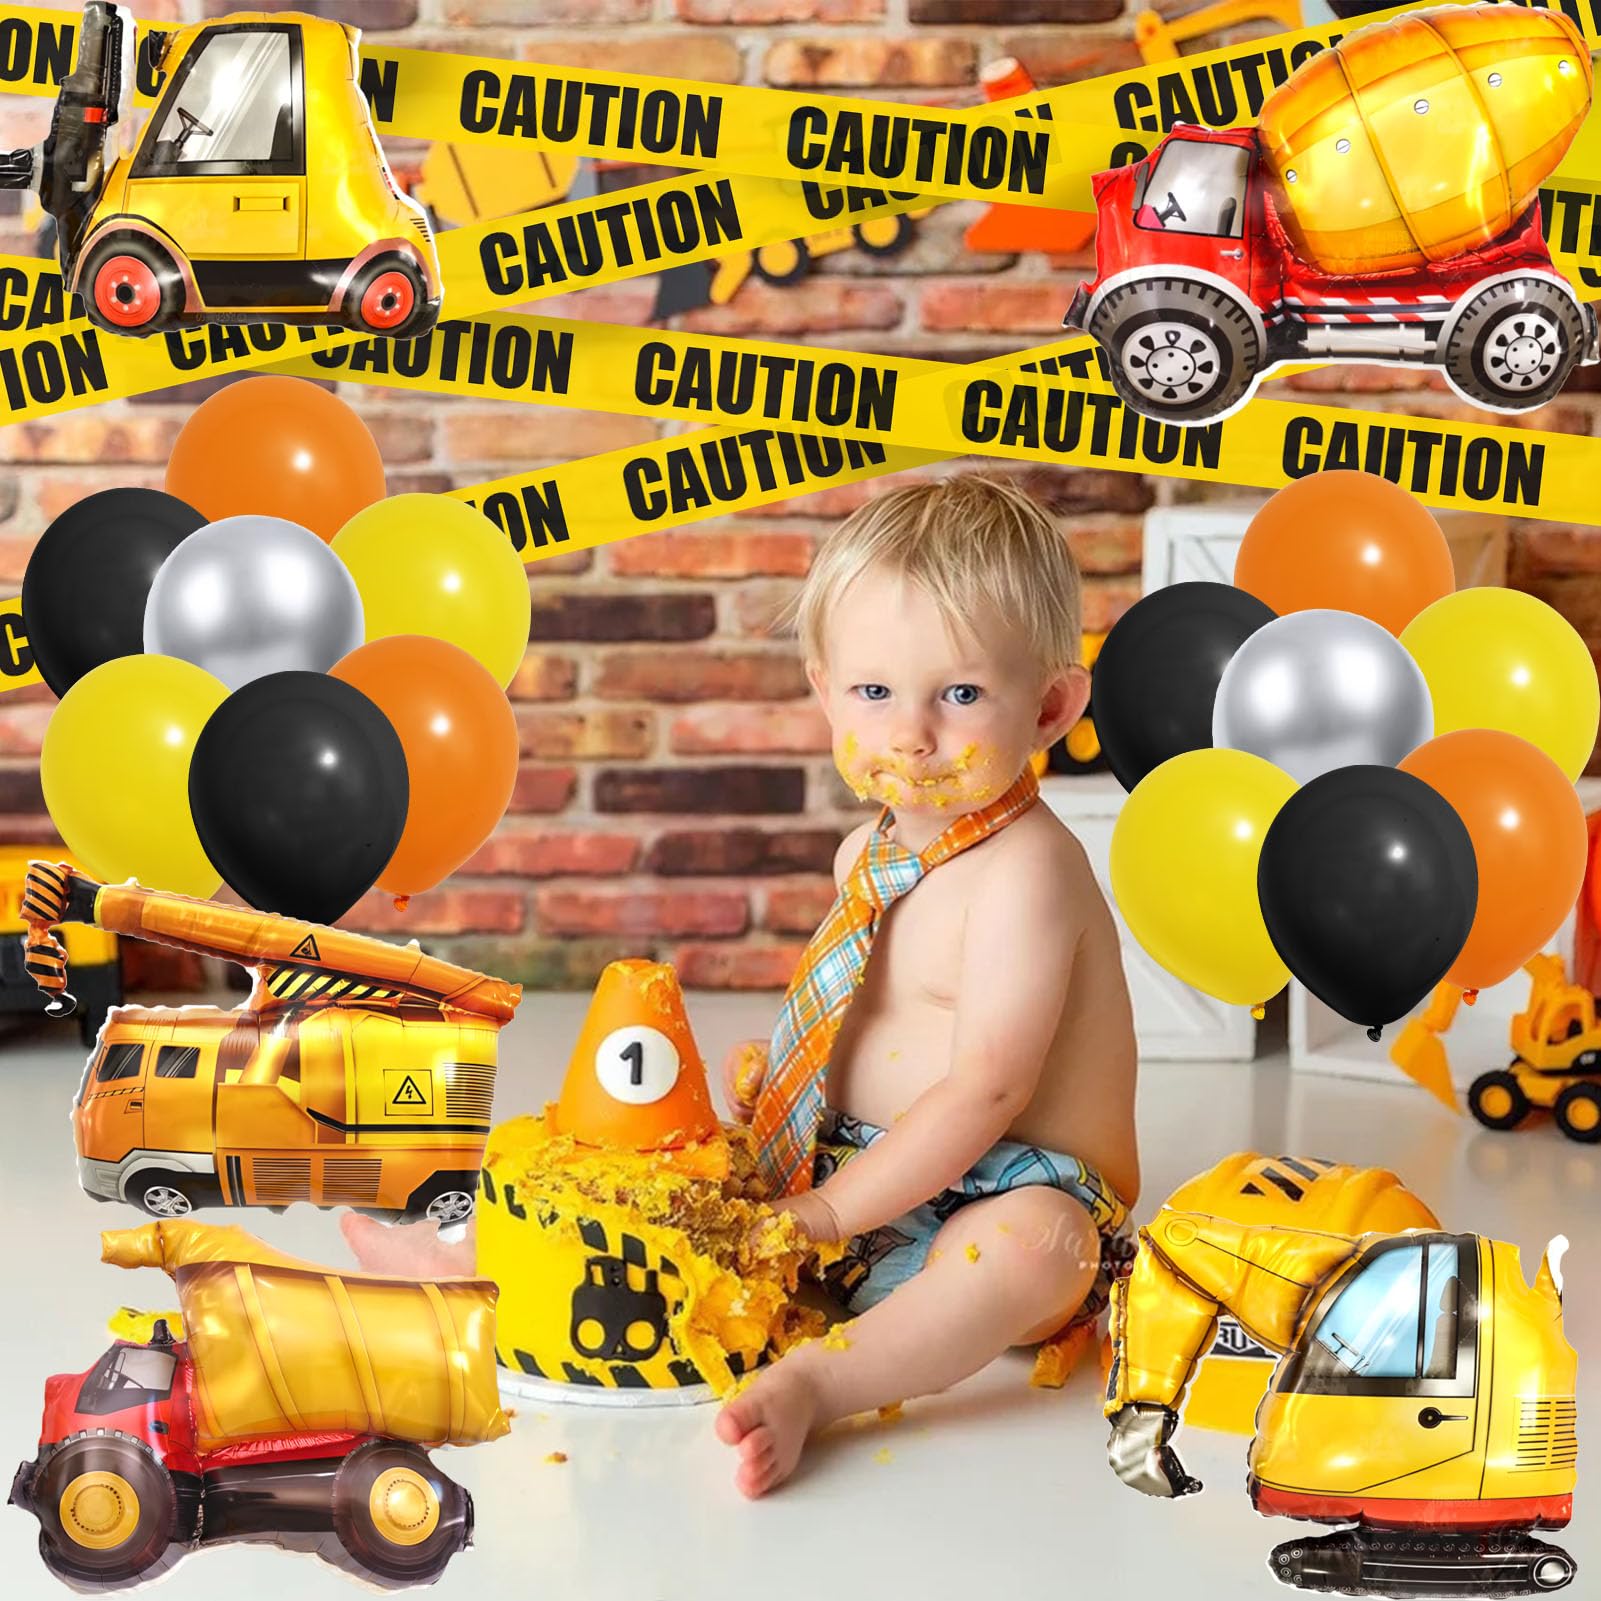 Winrayk Construction Party Decorations Birthday Supplies, Construction Balloon Arch Backdrop Tablecloth Caution Tape Engineering Truck Foil Balloons, Construction Birthday Party Supplies for Boys Kids